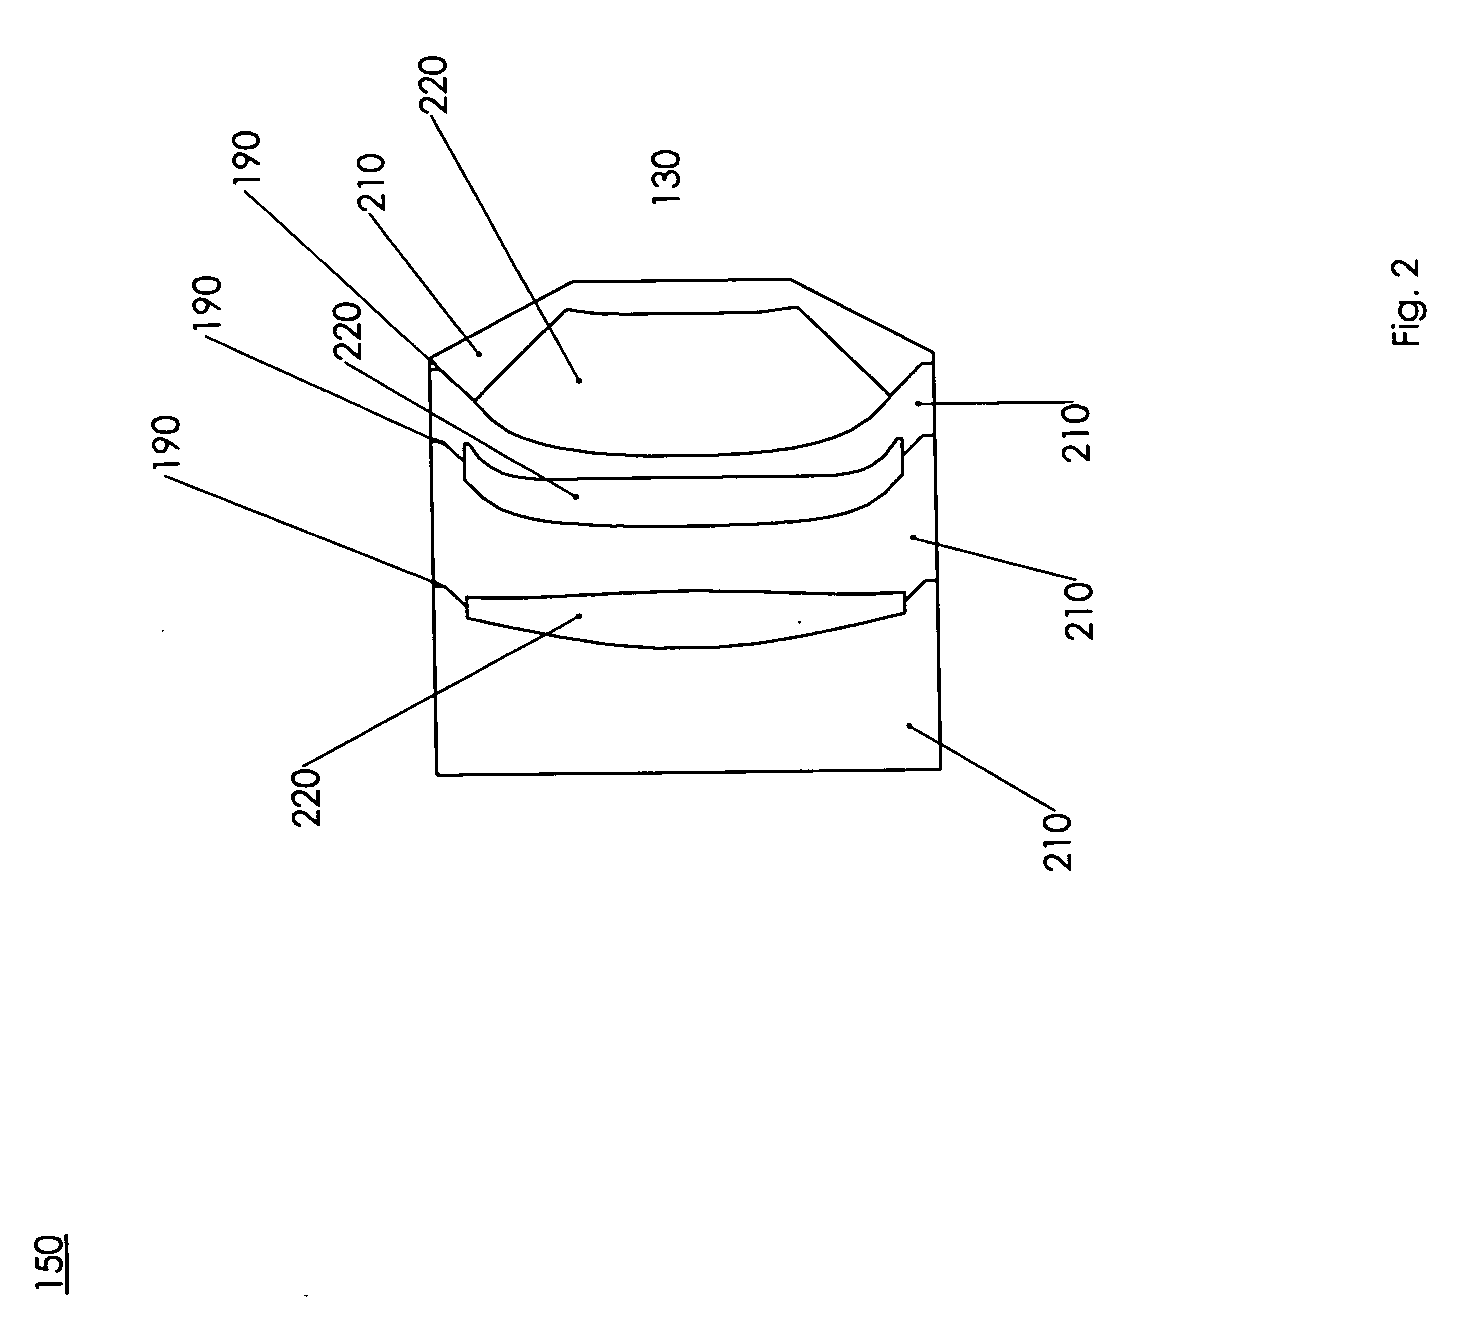 Acoustic imaging probe incorporating photoacoustic excitation